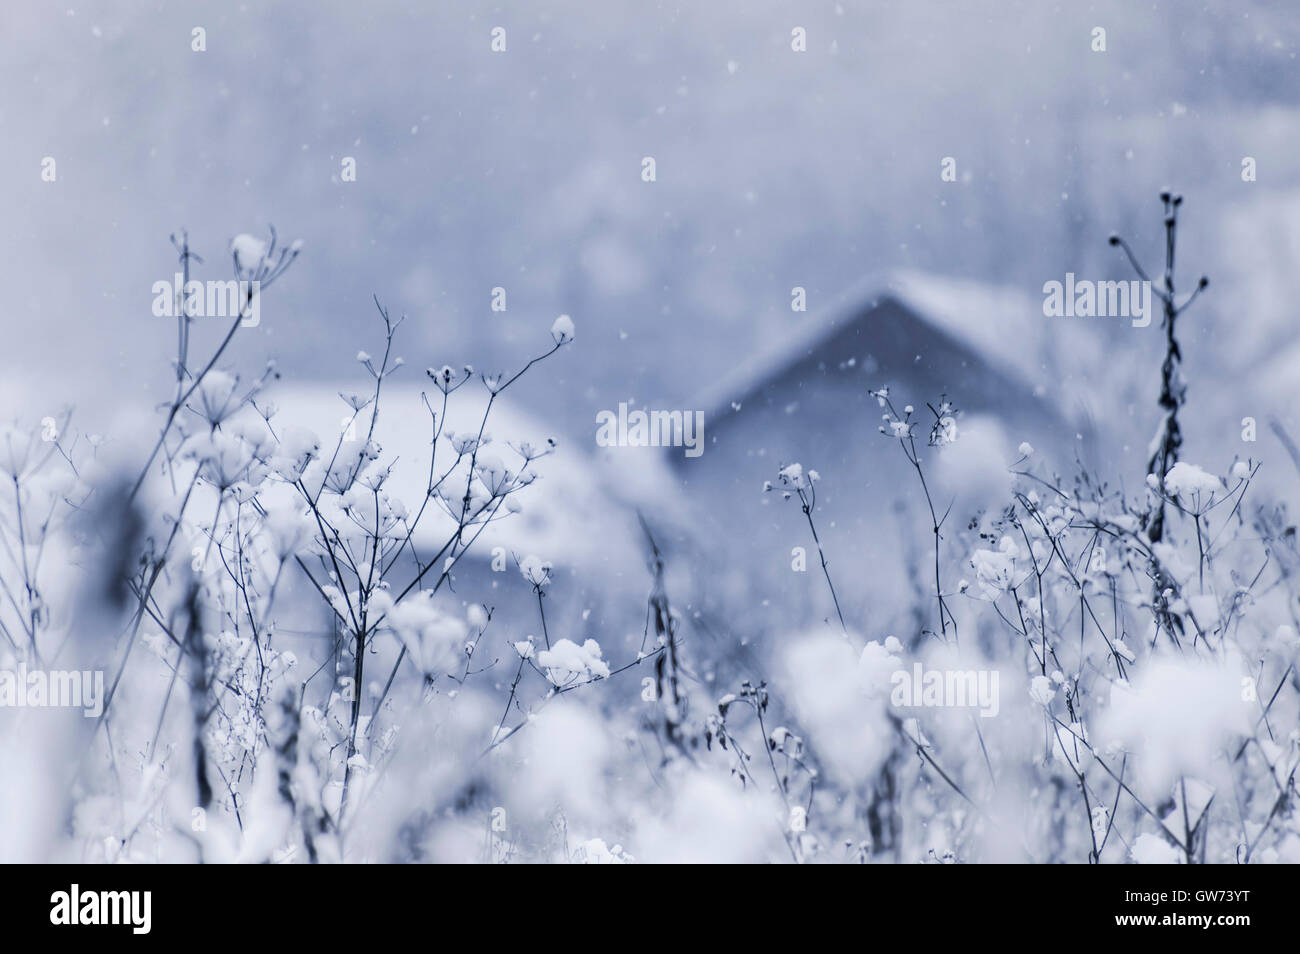 winter landscape with snow covering rooftops and plants Stock Photo